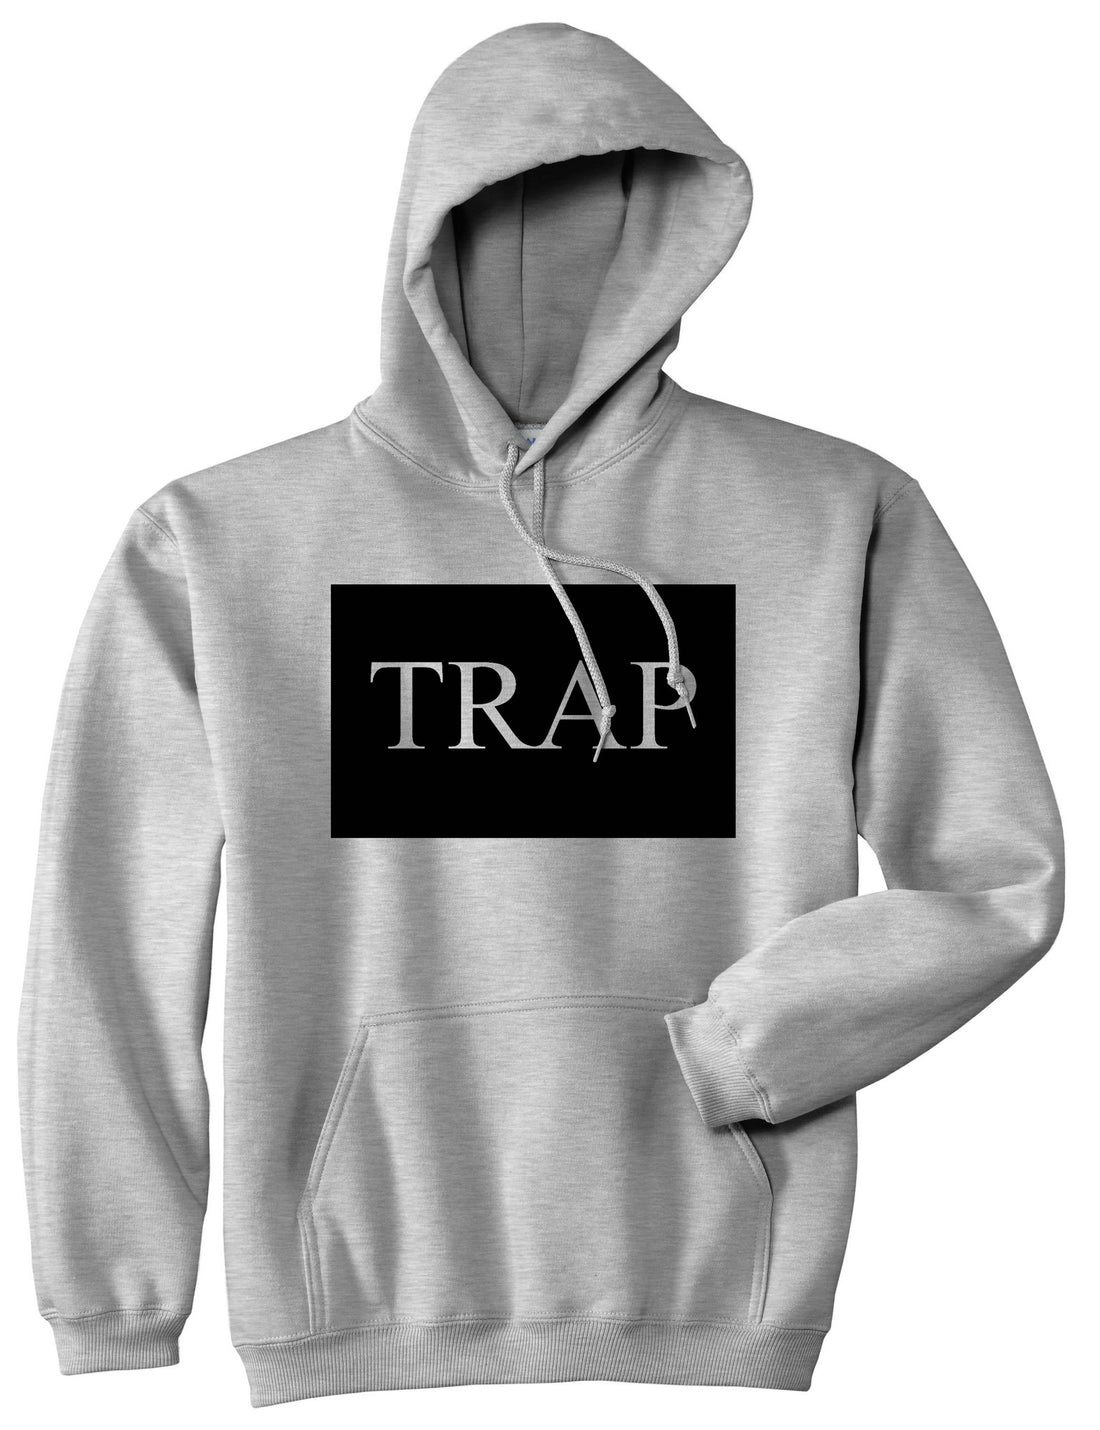 Trap Rectangle Logo Boys Kids Pullover Hoodie Hoody in Grey By Kings Of NY